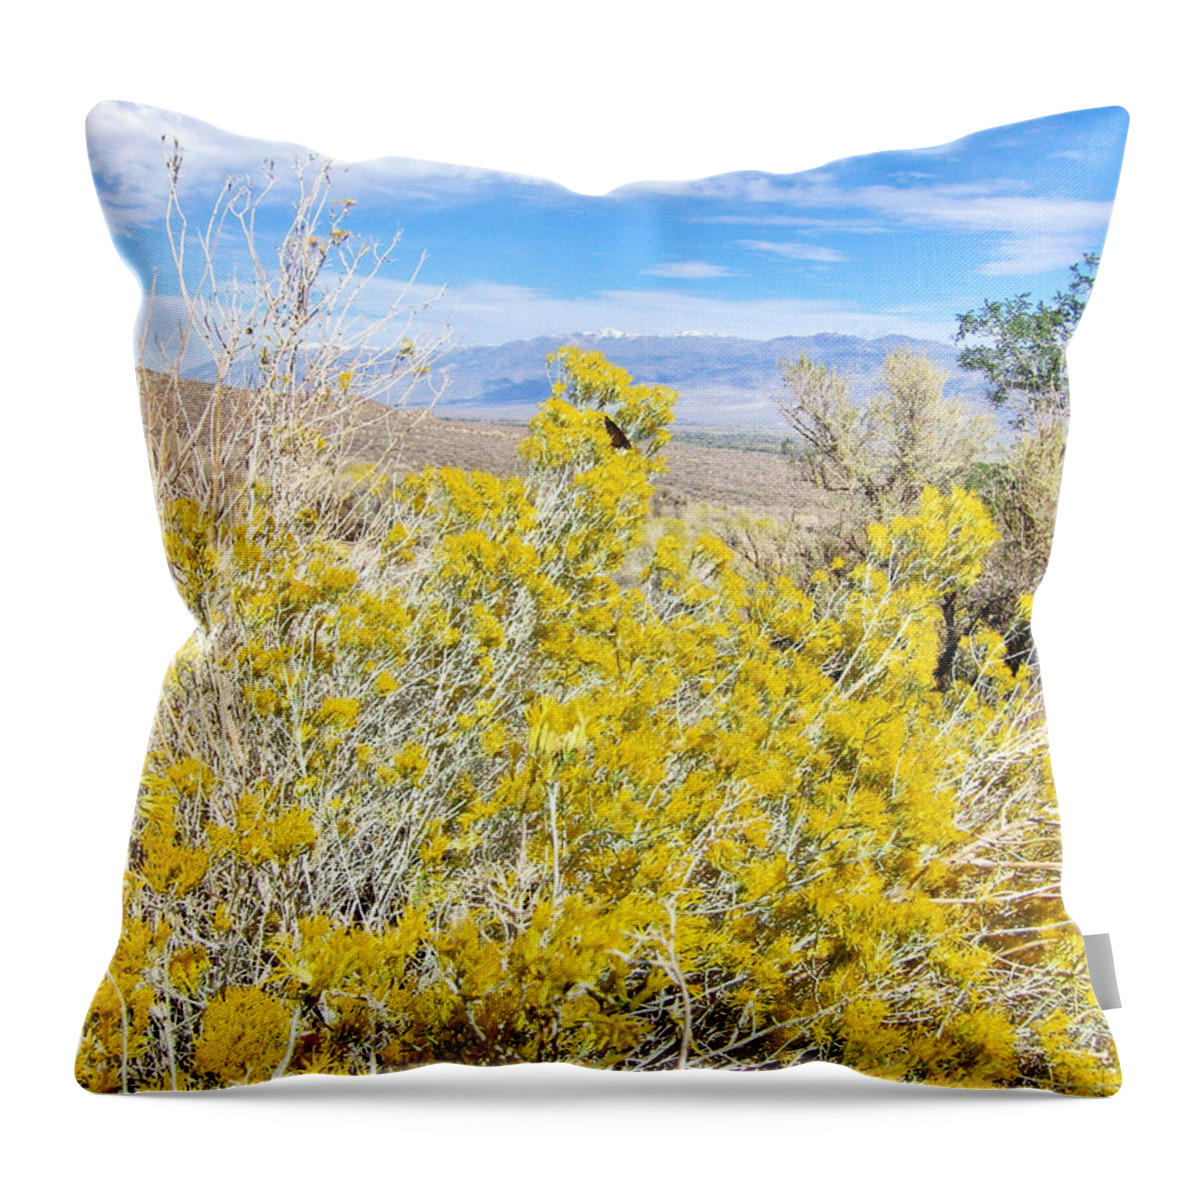 Sky Throw Pillow featuring the photograph Flowering Yellow by Marilyn Diaz